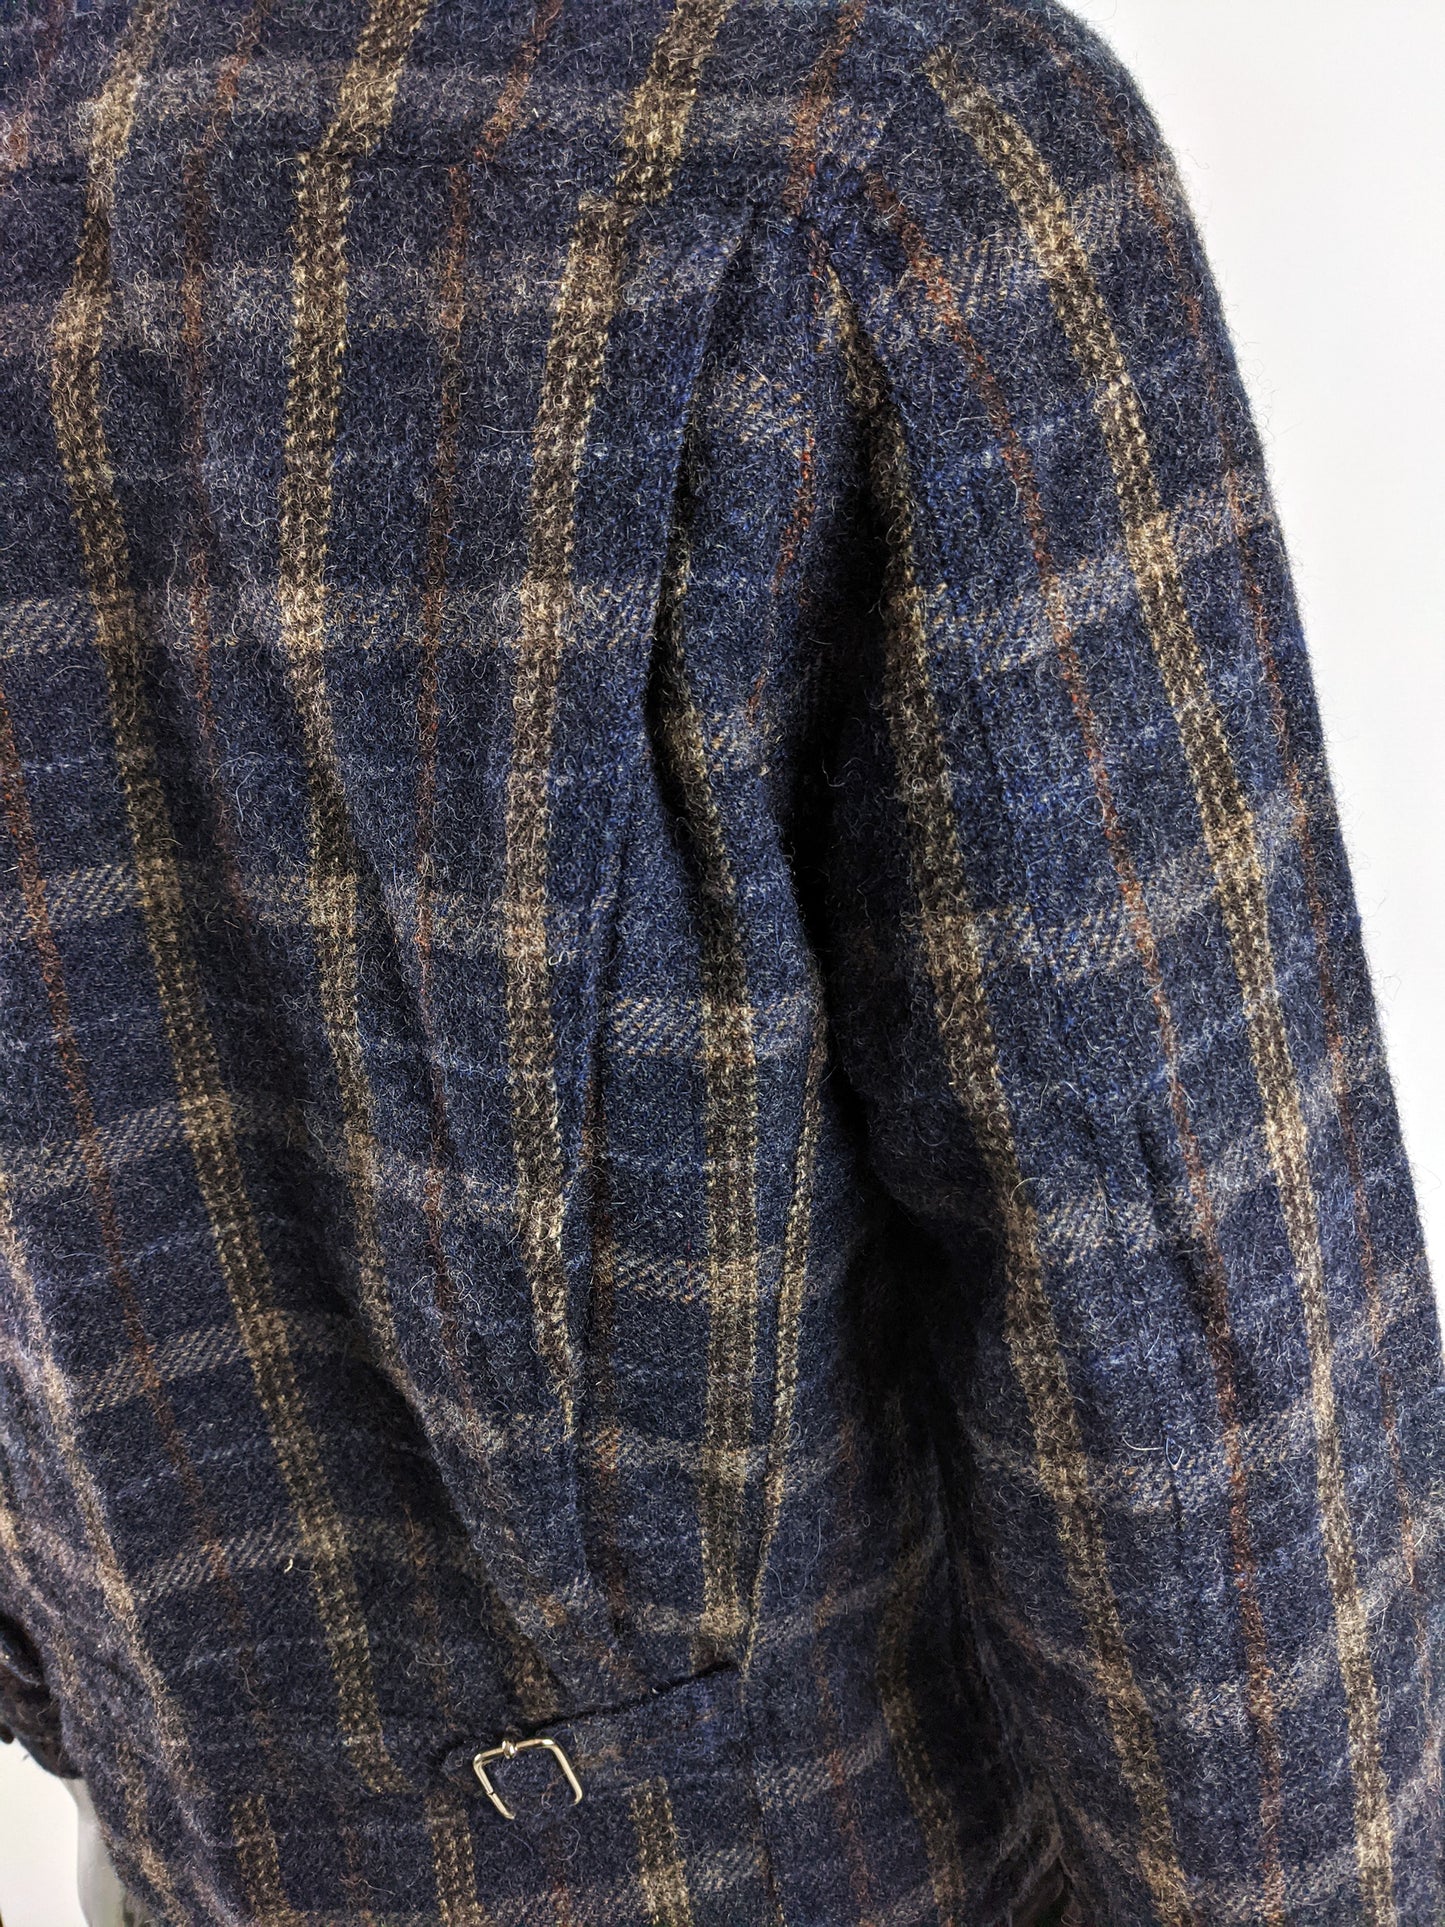 Duffer of St George Mens Wool Checked Jacket, 1980s